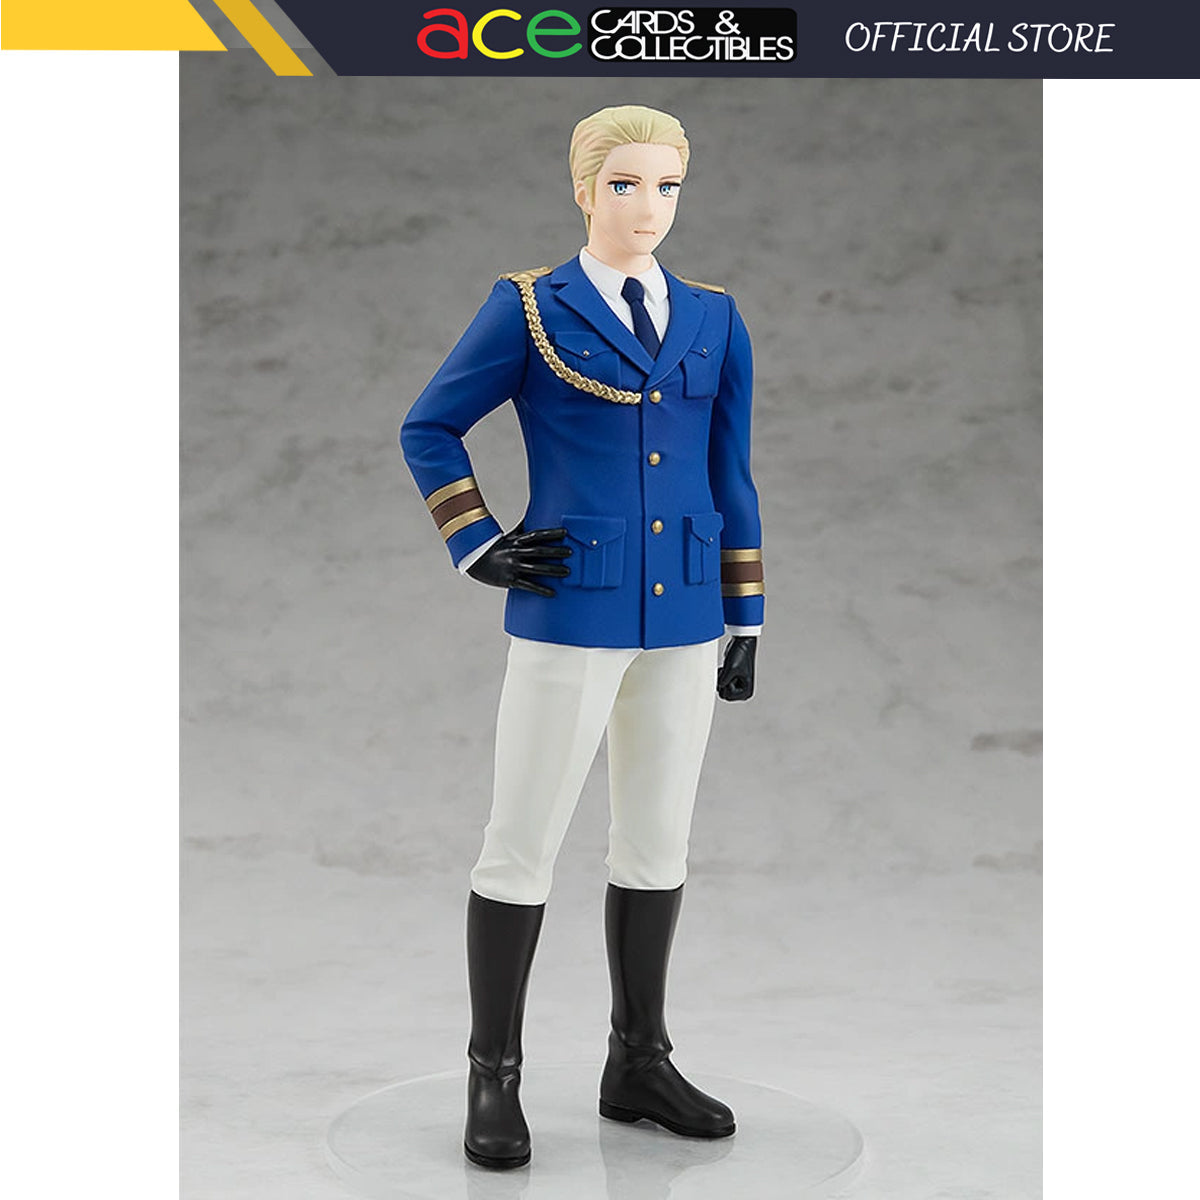  POP UP Parade Darling in The Frankis Zero 2, Non-Scale,  Plastic, Pre-Painted Complete Figure : Toys & Games